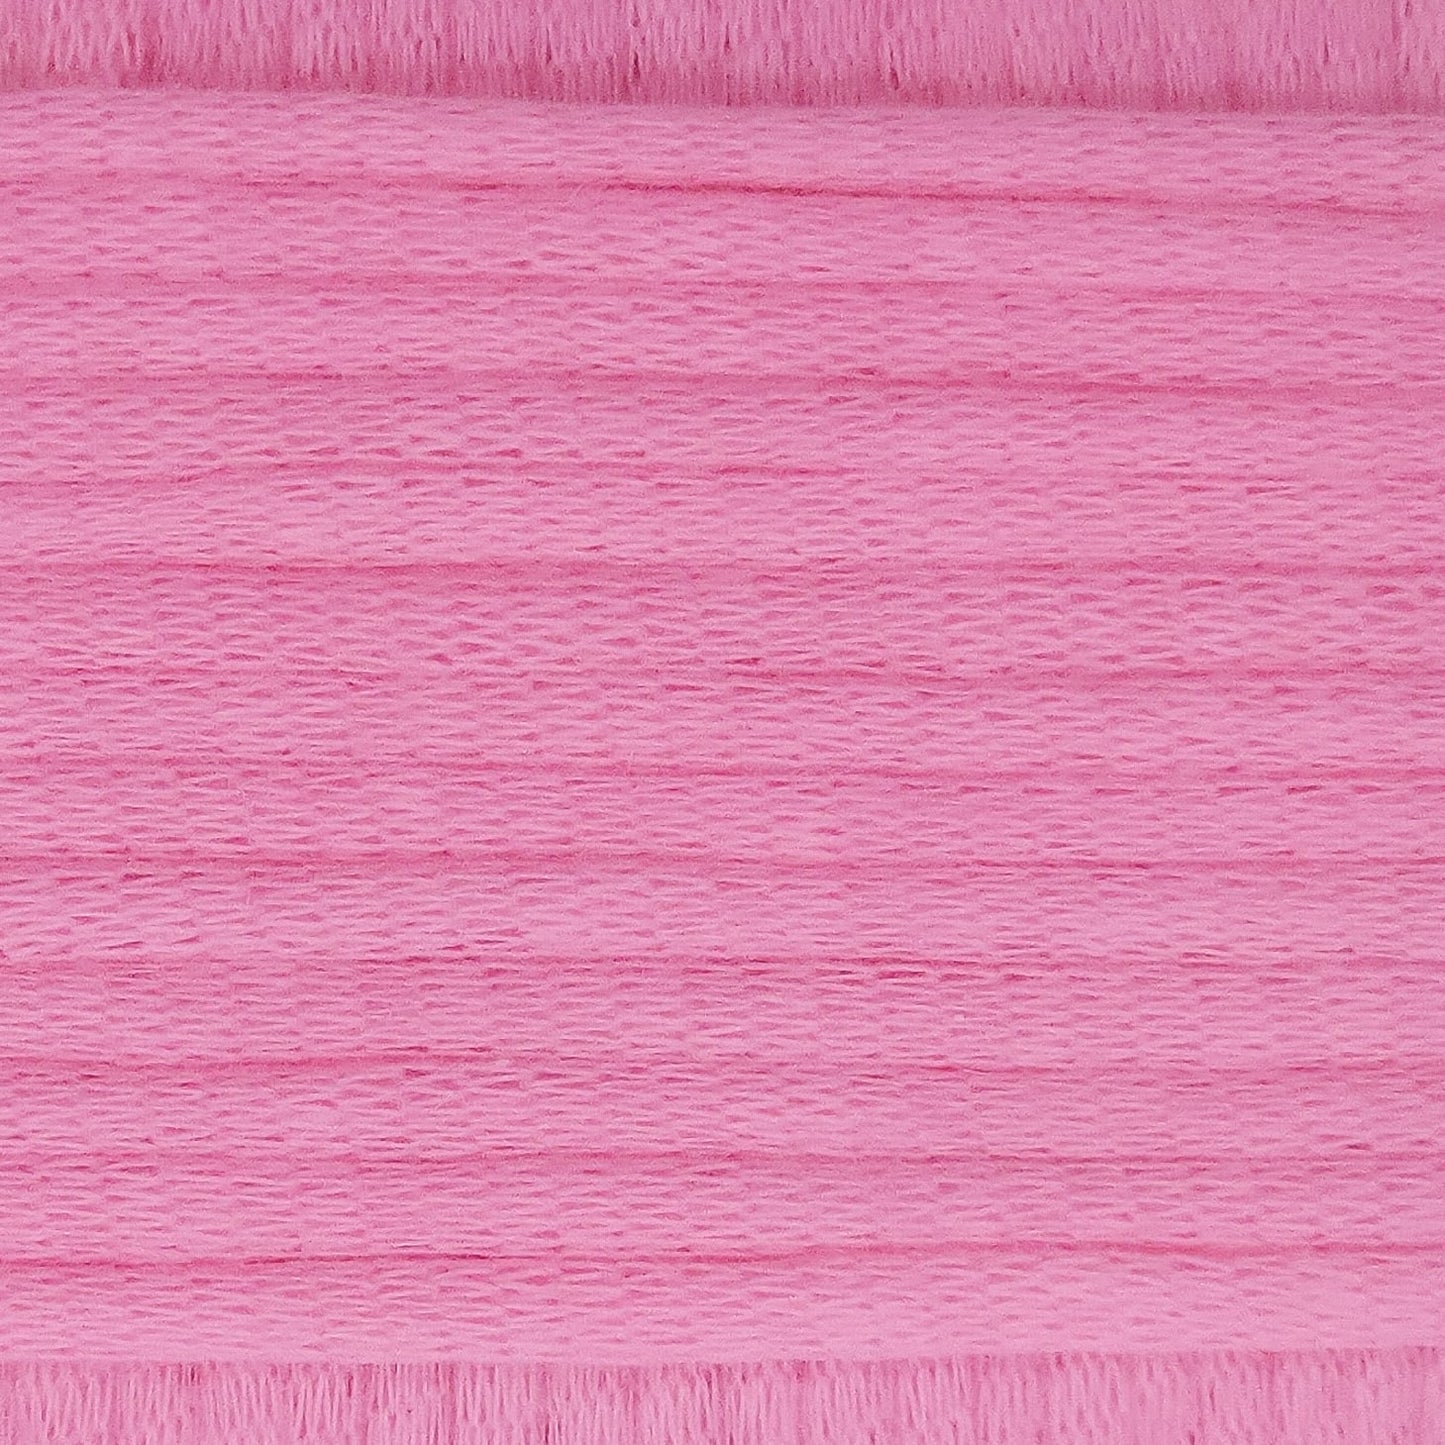 A close-up image showing the texture of a summer pink coloured yarn that is friendly for crochet beginners.